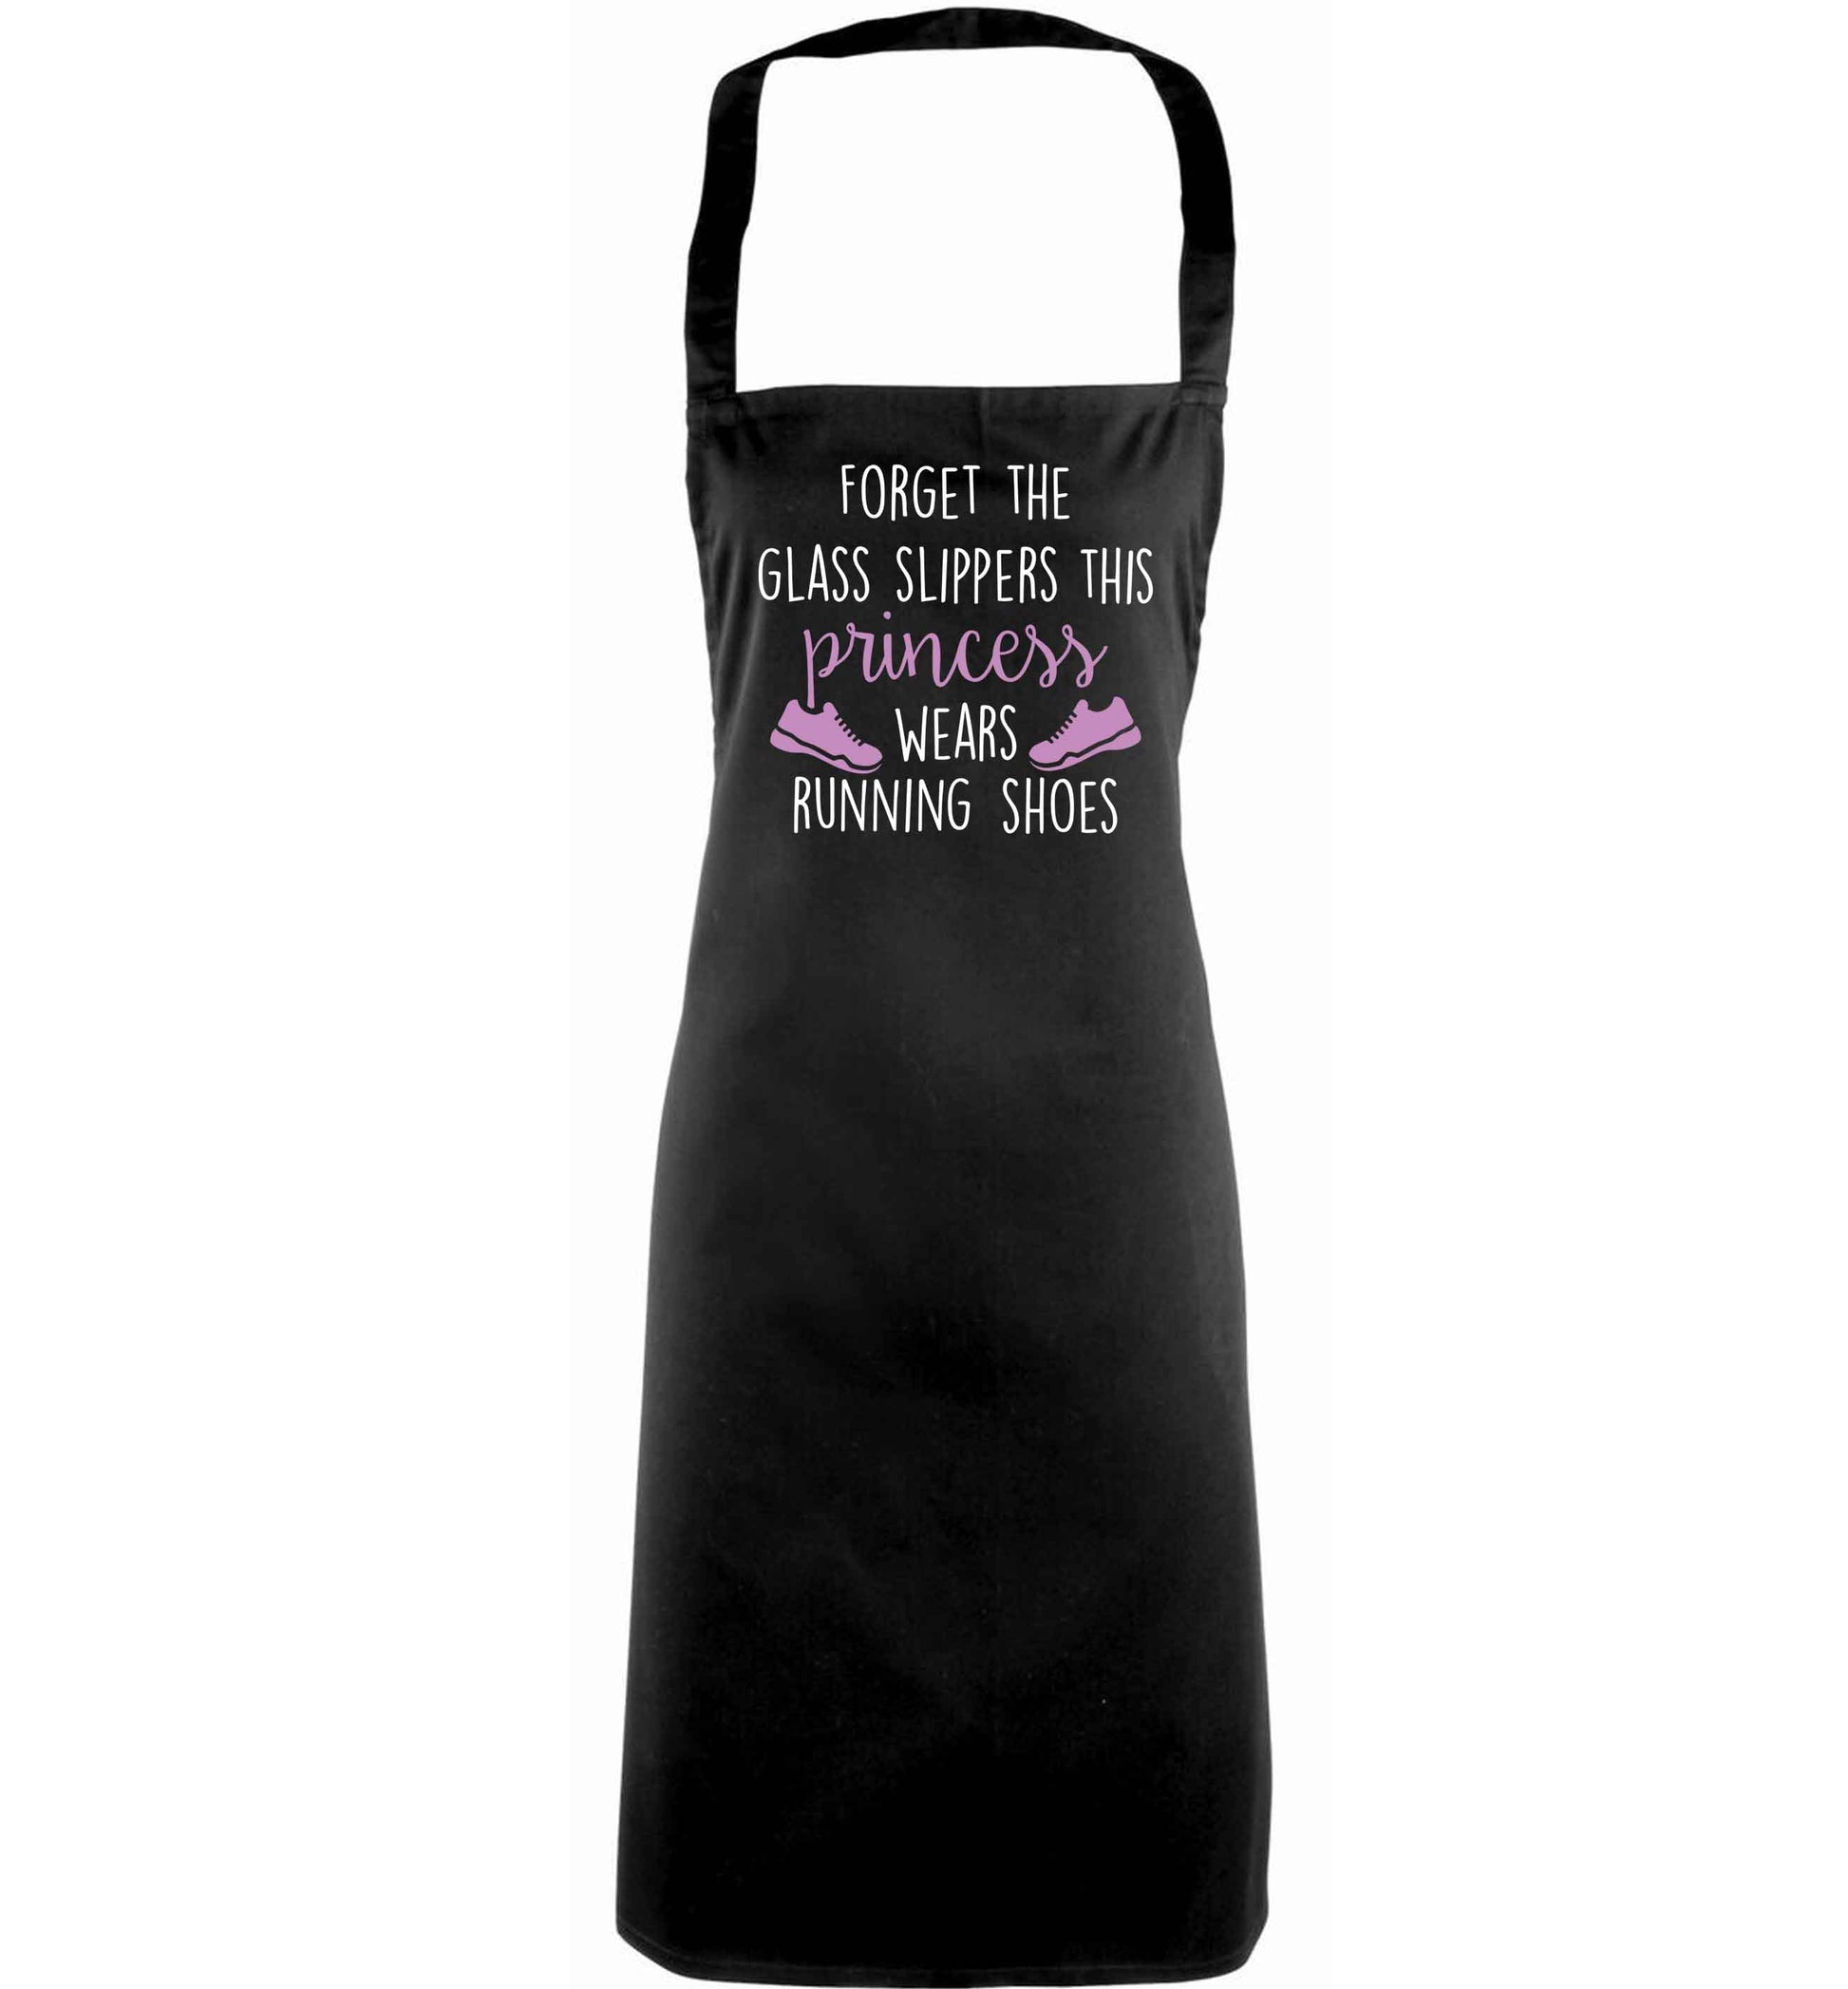 Forget the glass slippers this princess wears running shoes adults black apron